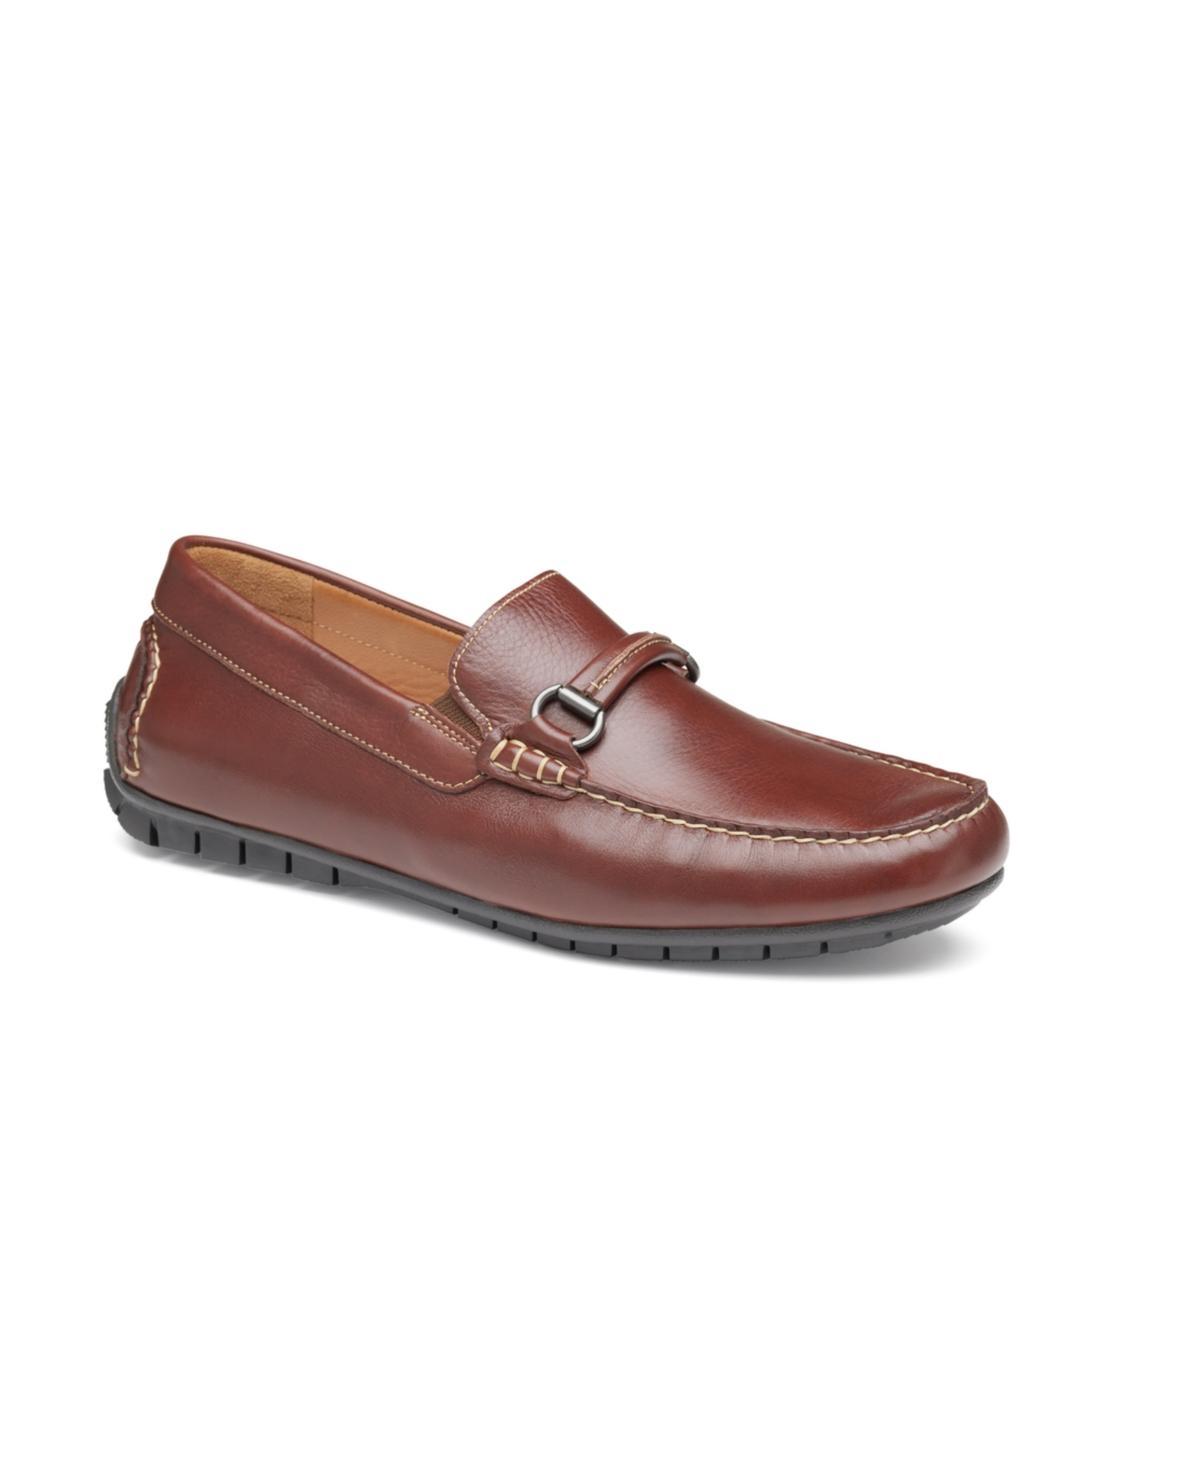 Johnston & Murphy Cort Bit Driving Loafer Product Image